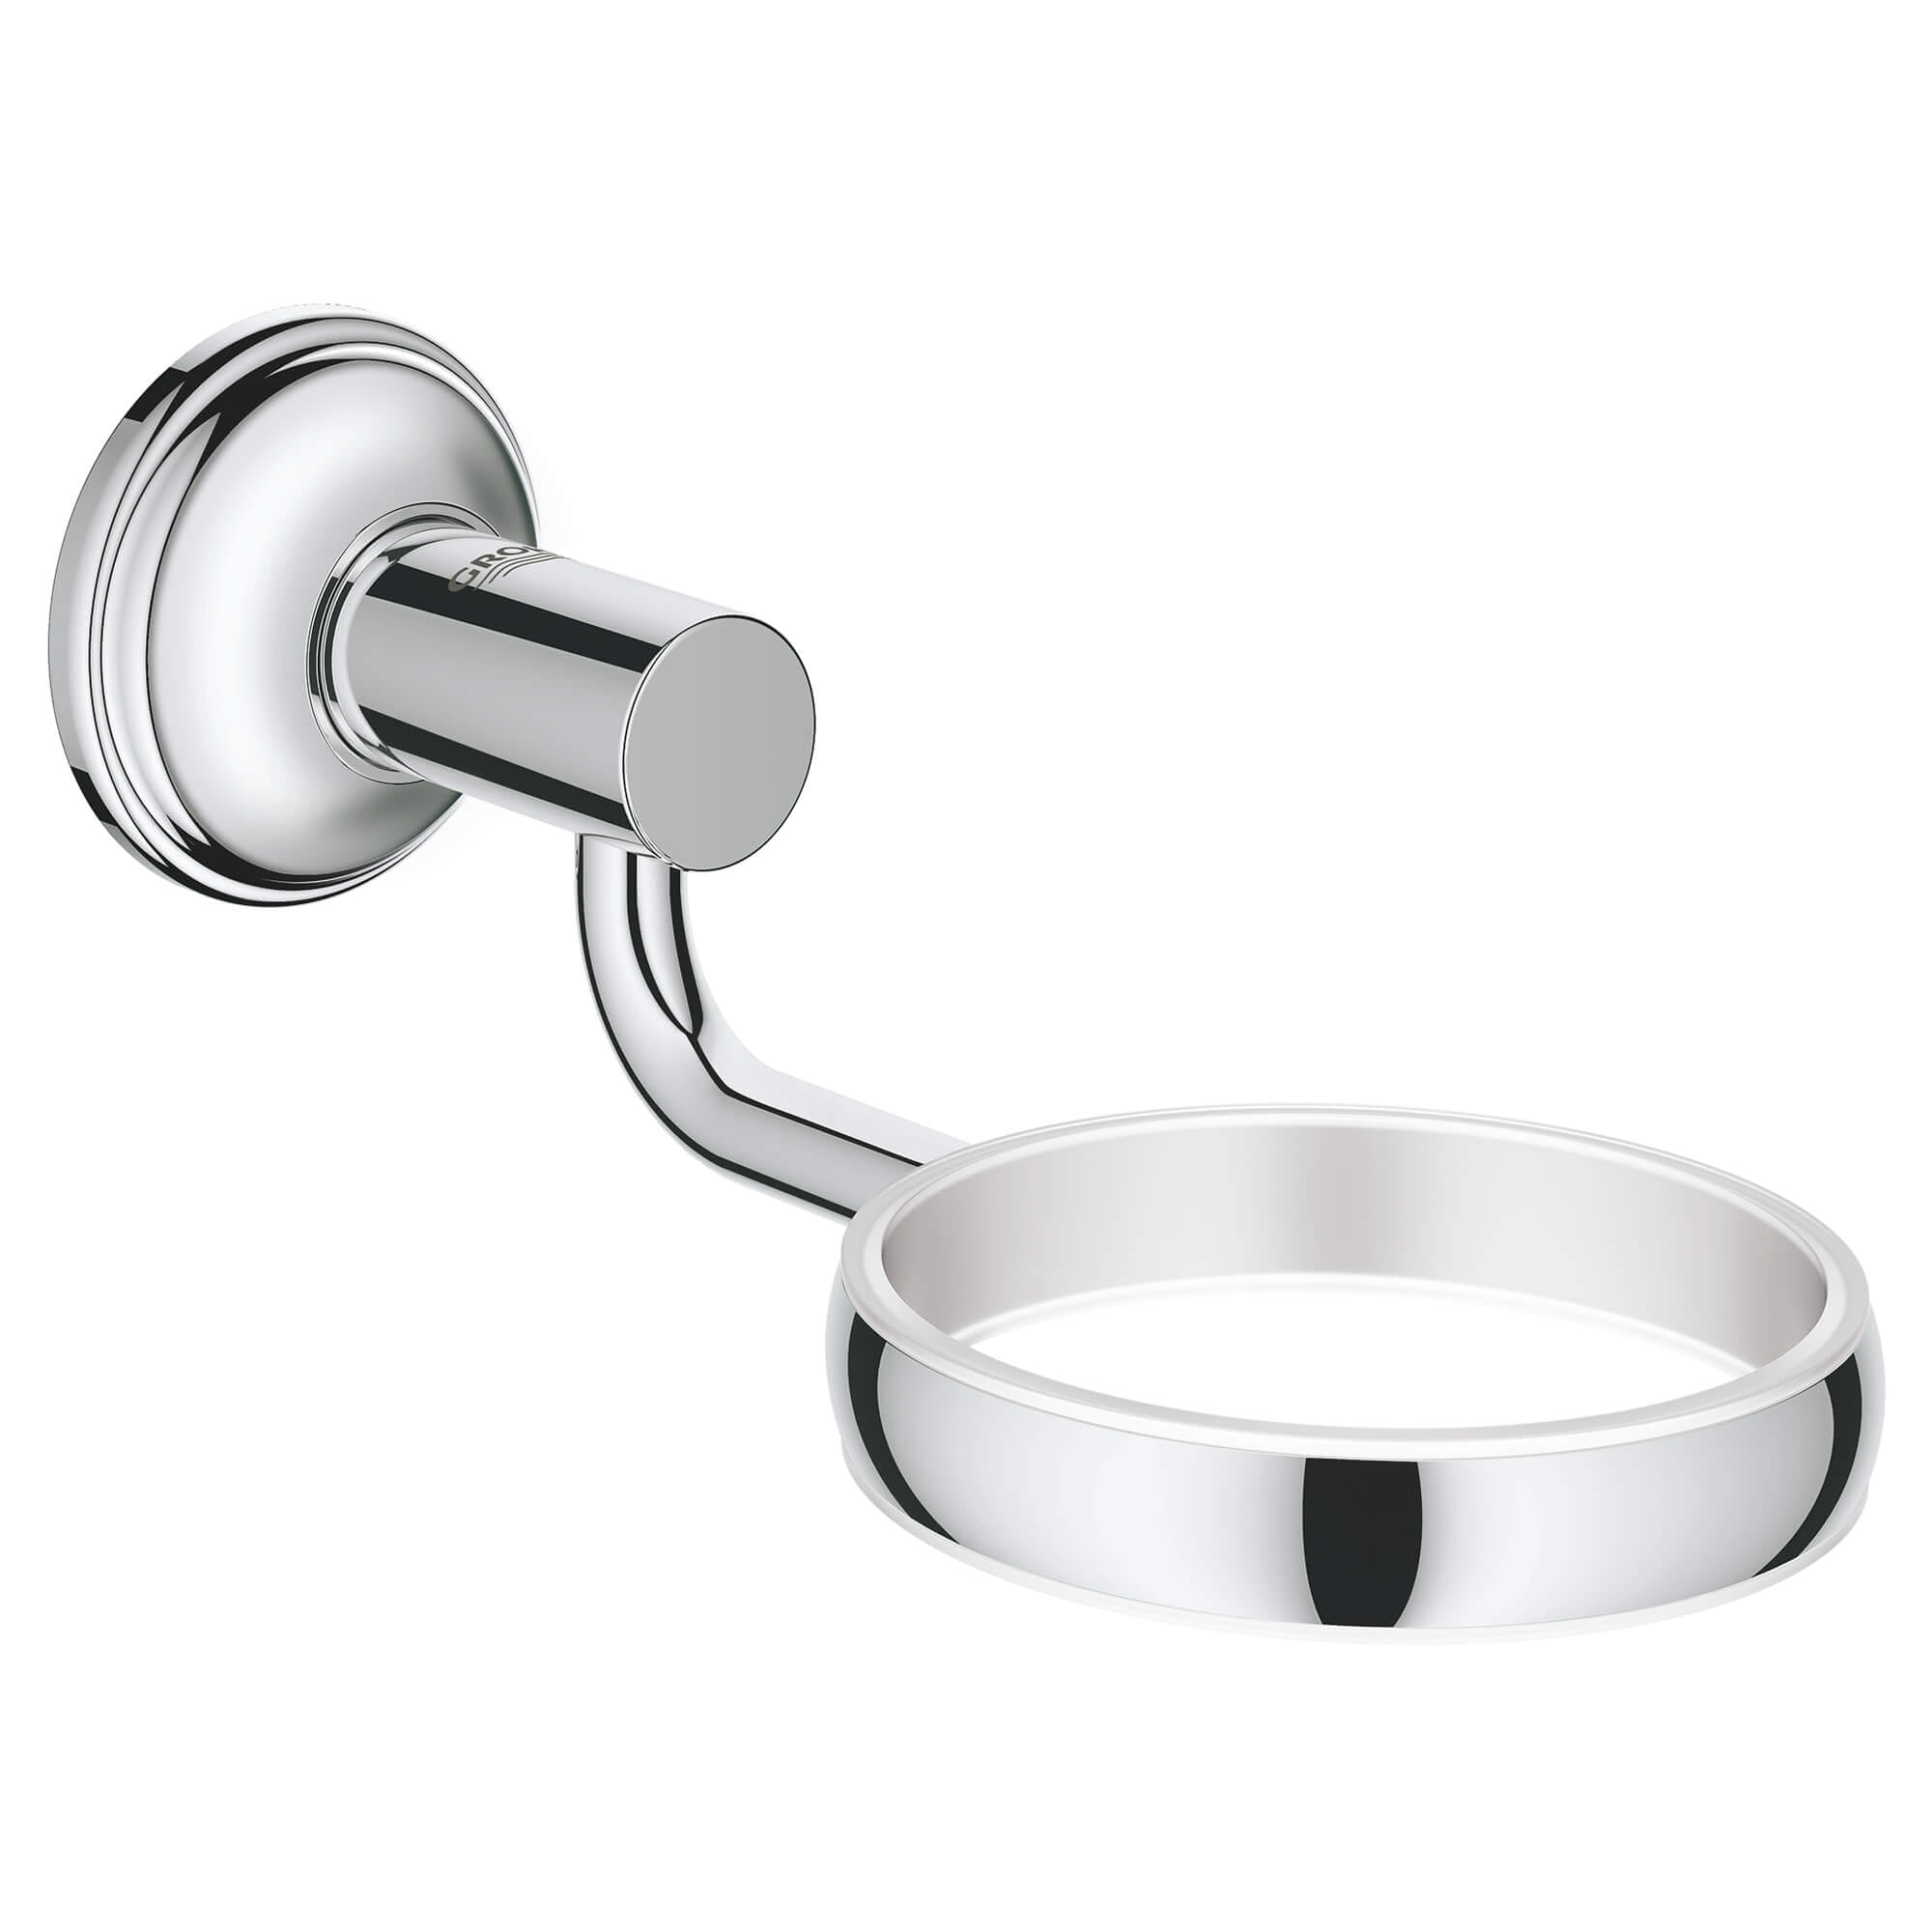 Essentials Authentic Support mural GROHE CHROME